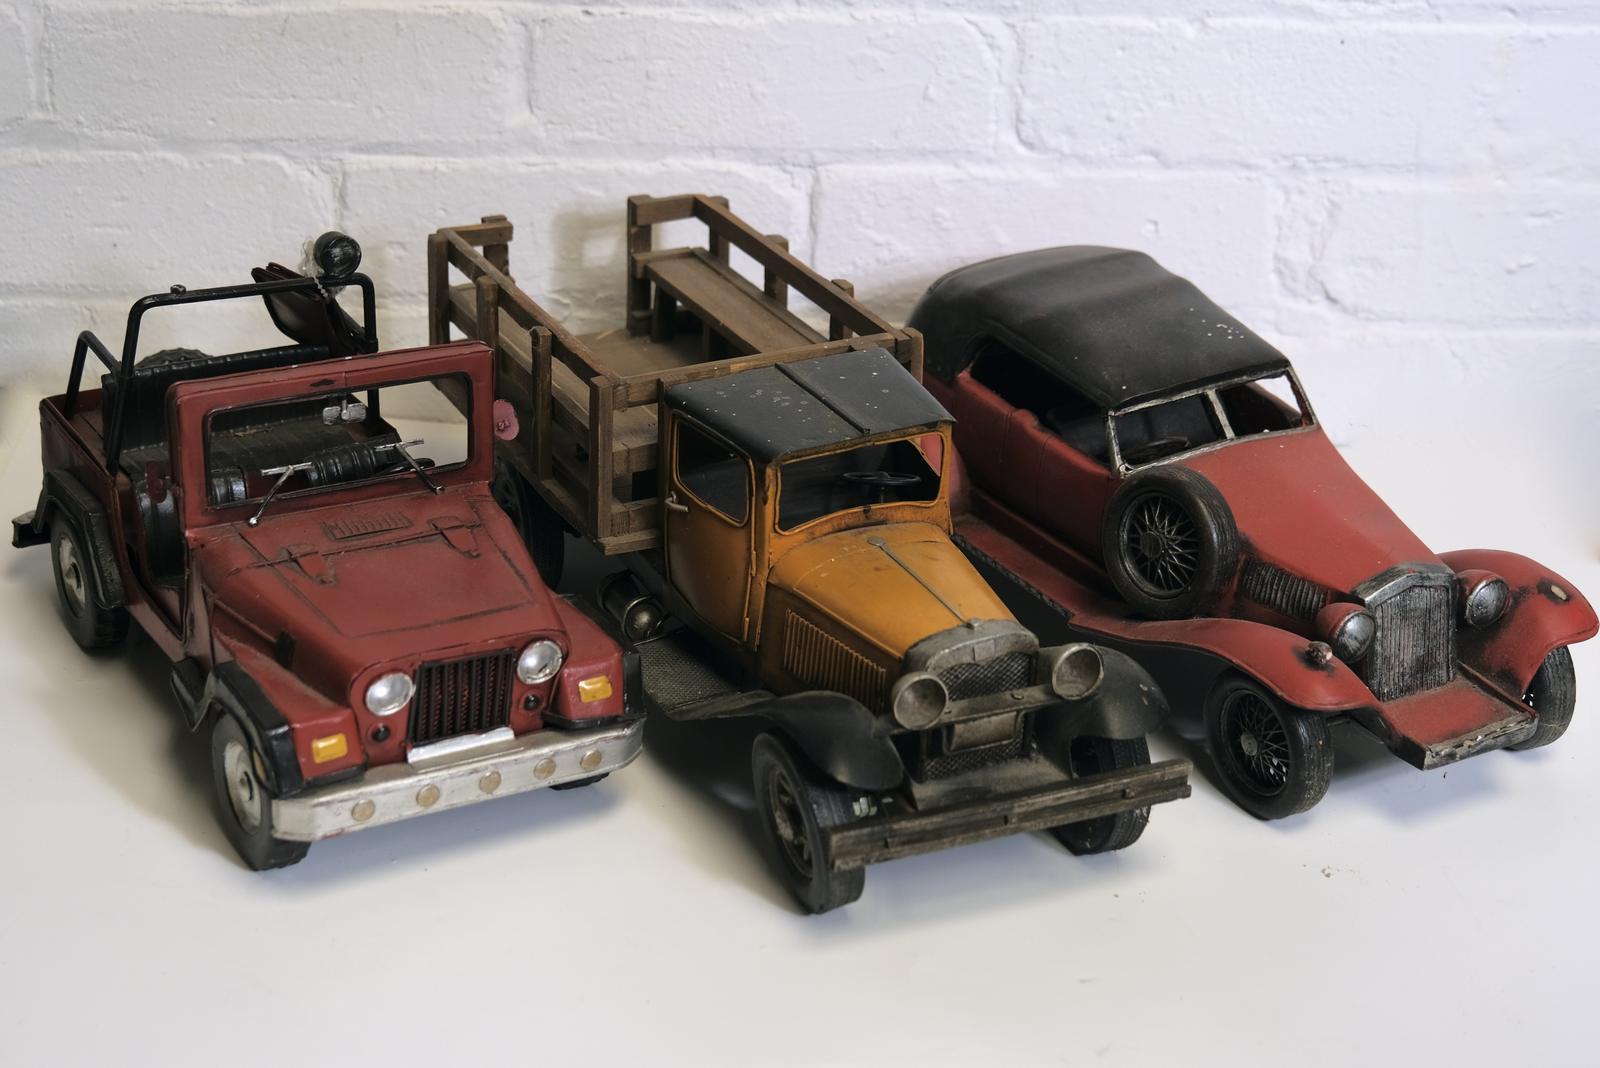 DECORATIVE TRUCK AND CARS